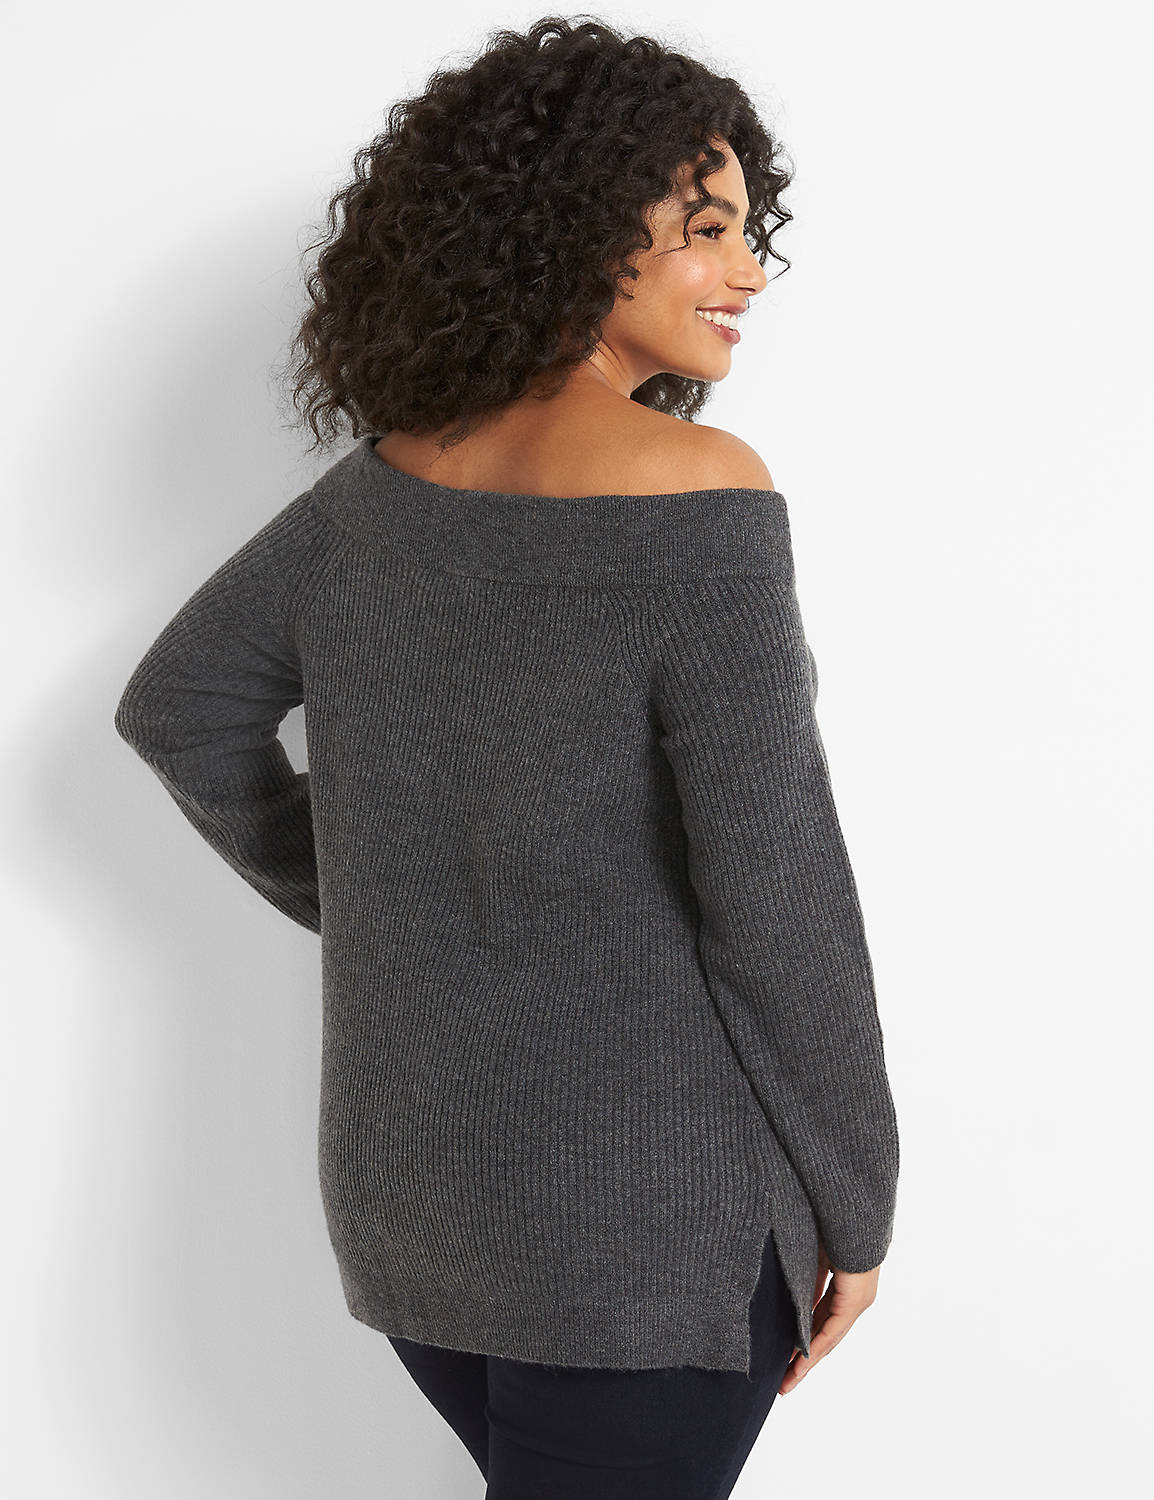 Off-The-Shoulder Sweater Product Image 2